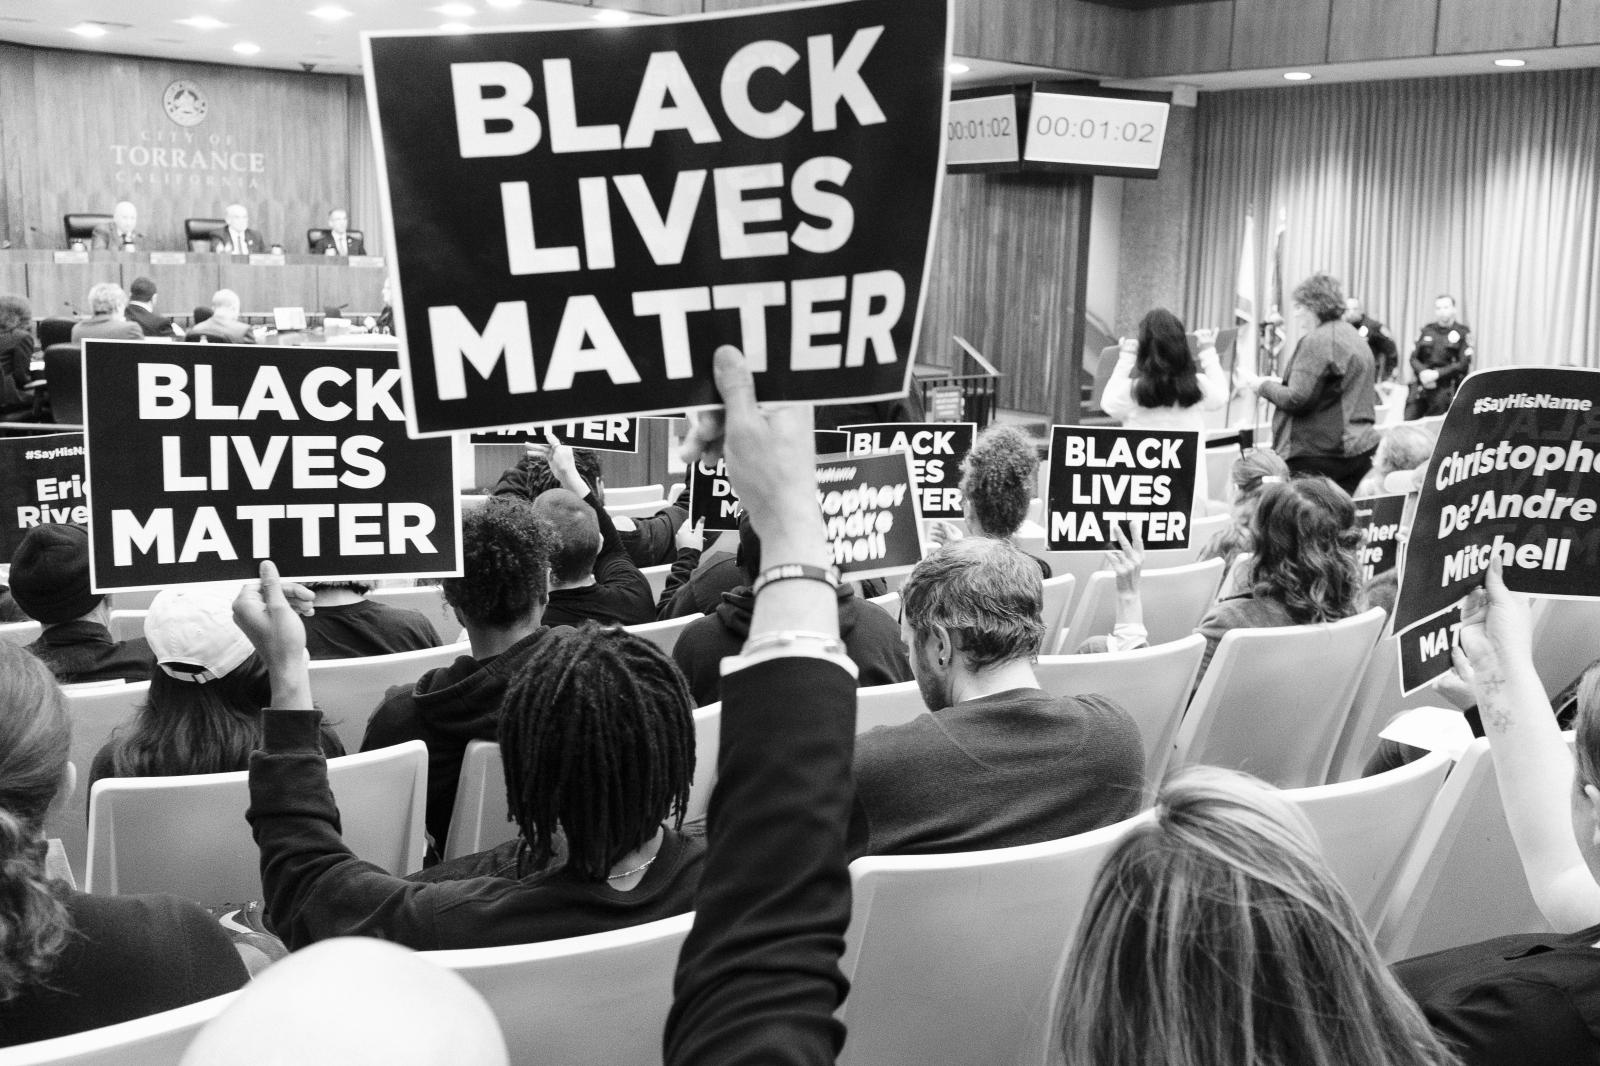 BLM at Torrance City Council for Christopher De'Andre Mitchell, 2019 | Buy this image